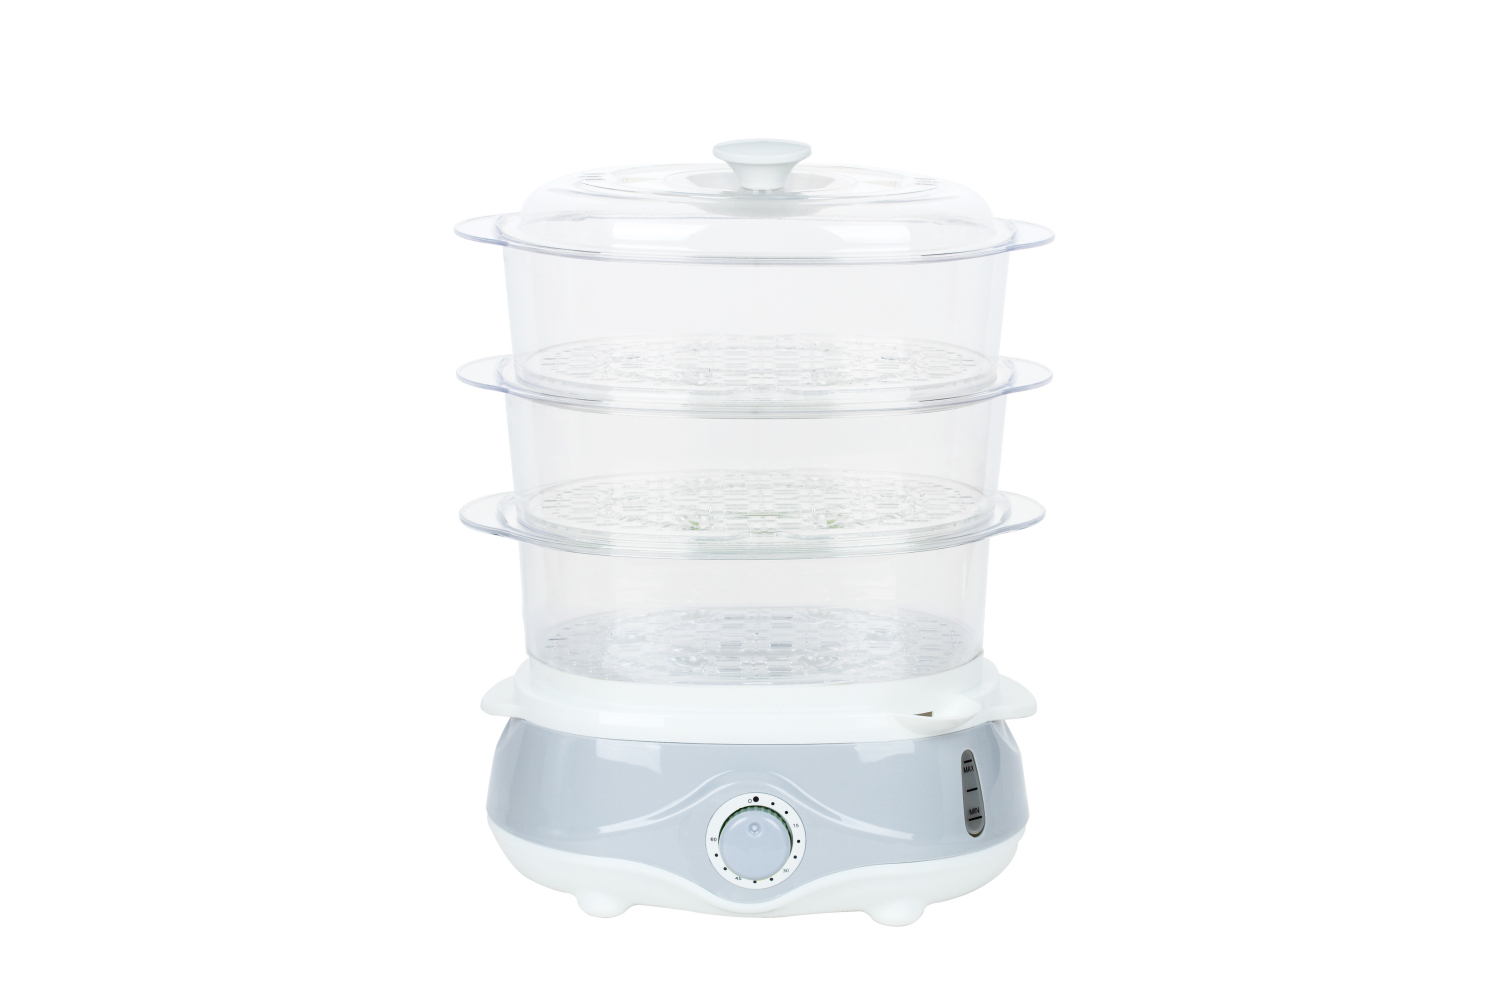 Practical 11L Steamer with food grade material, steam your Cuisine for Mouthwatering Meals!